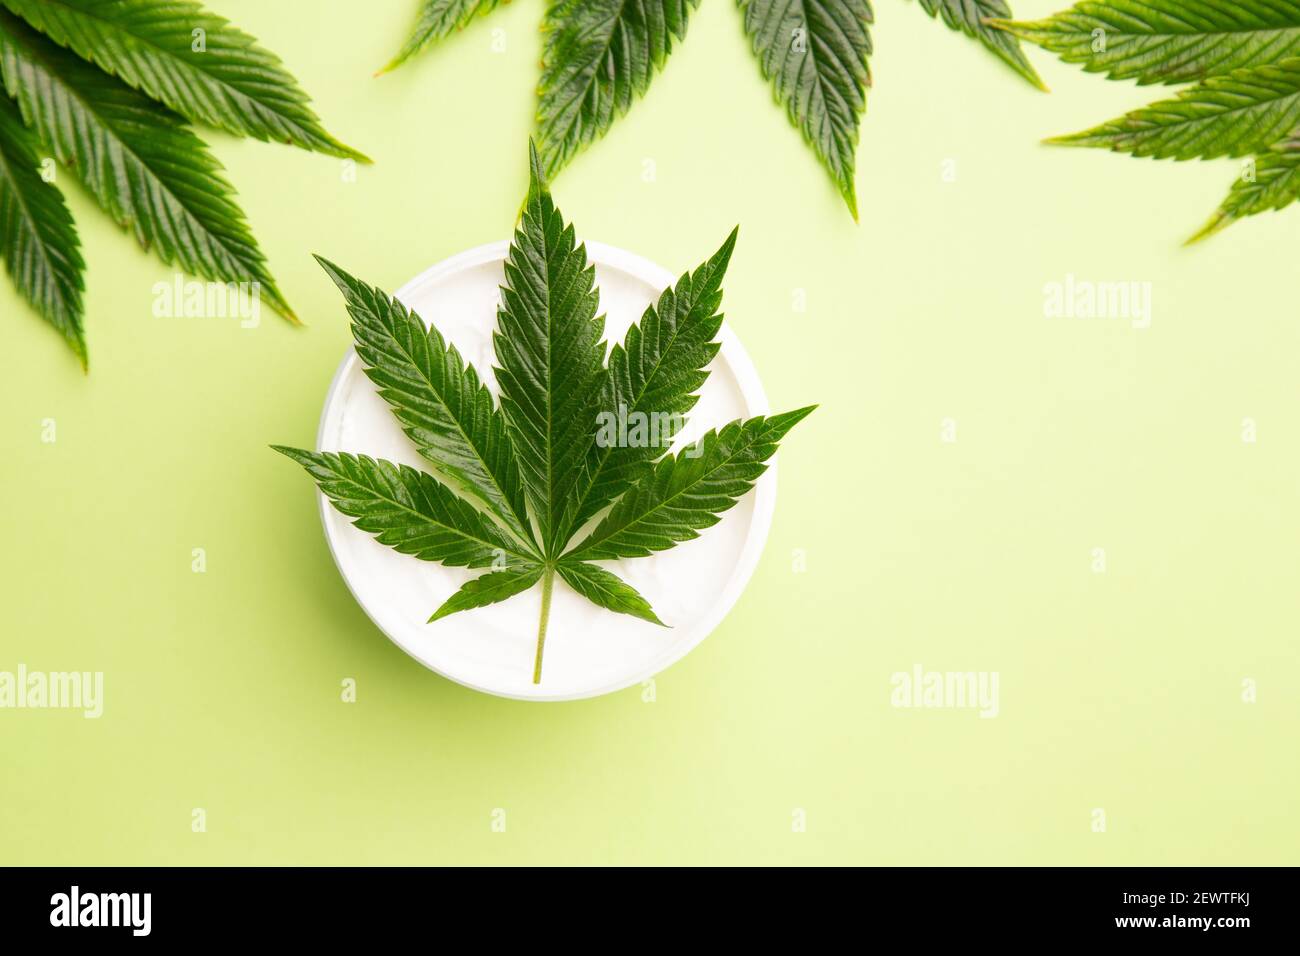 Heavy CBD topical lotion or cream with cannabis leaf on a green background Stock Photo